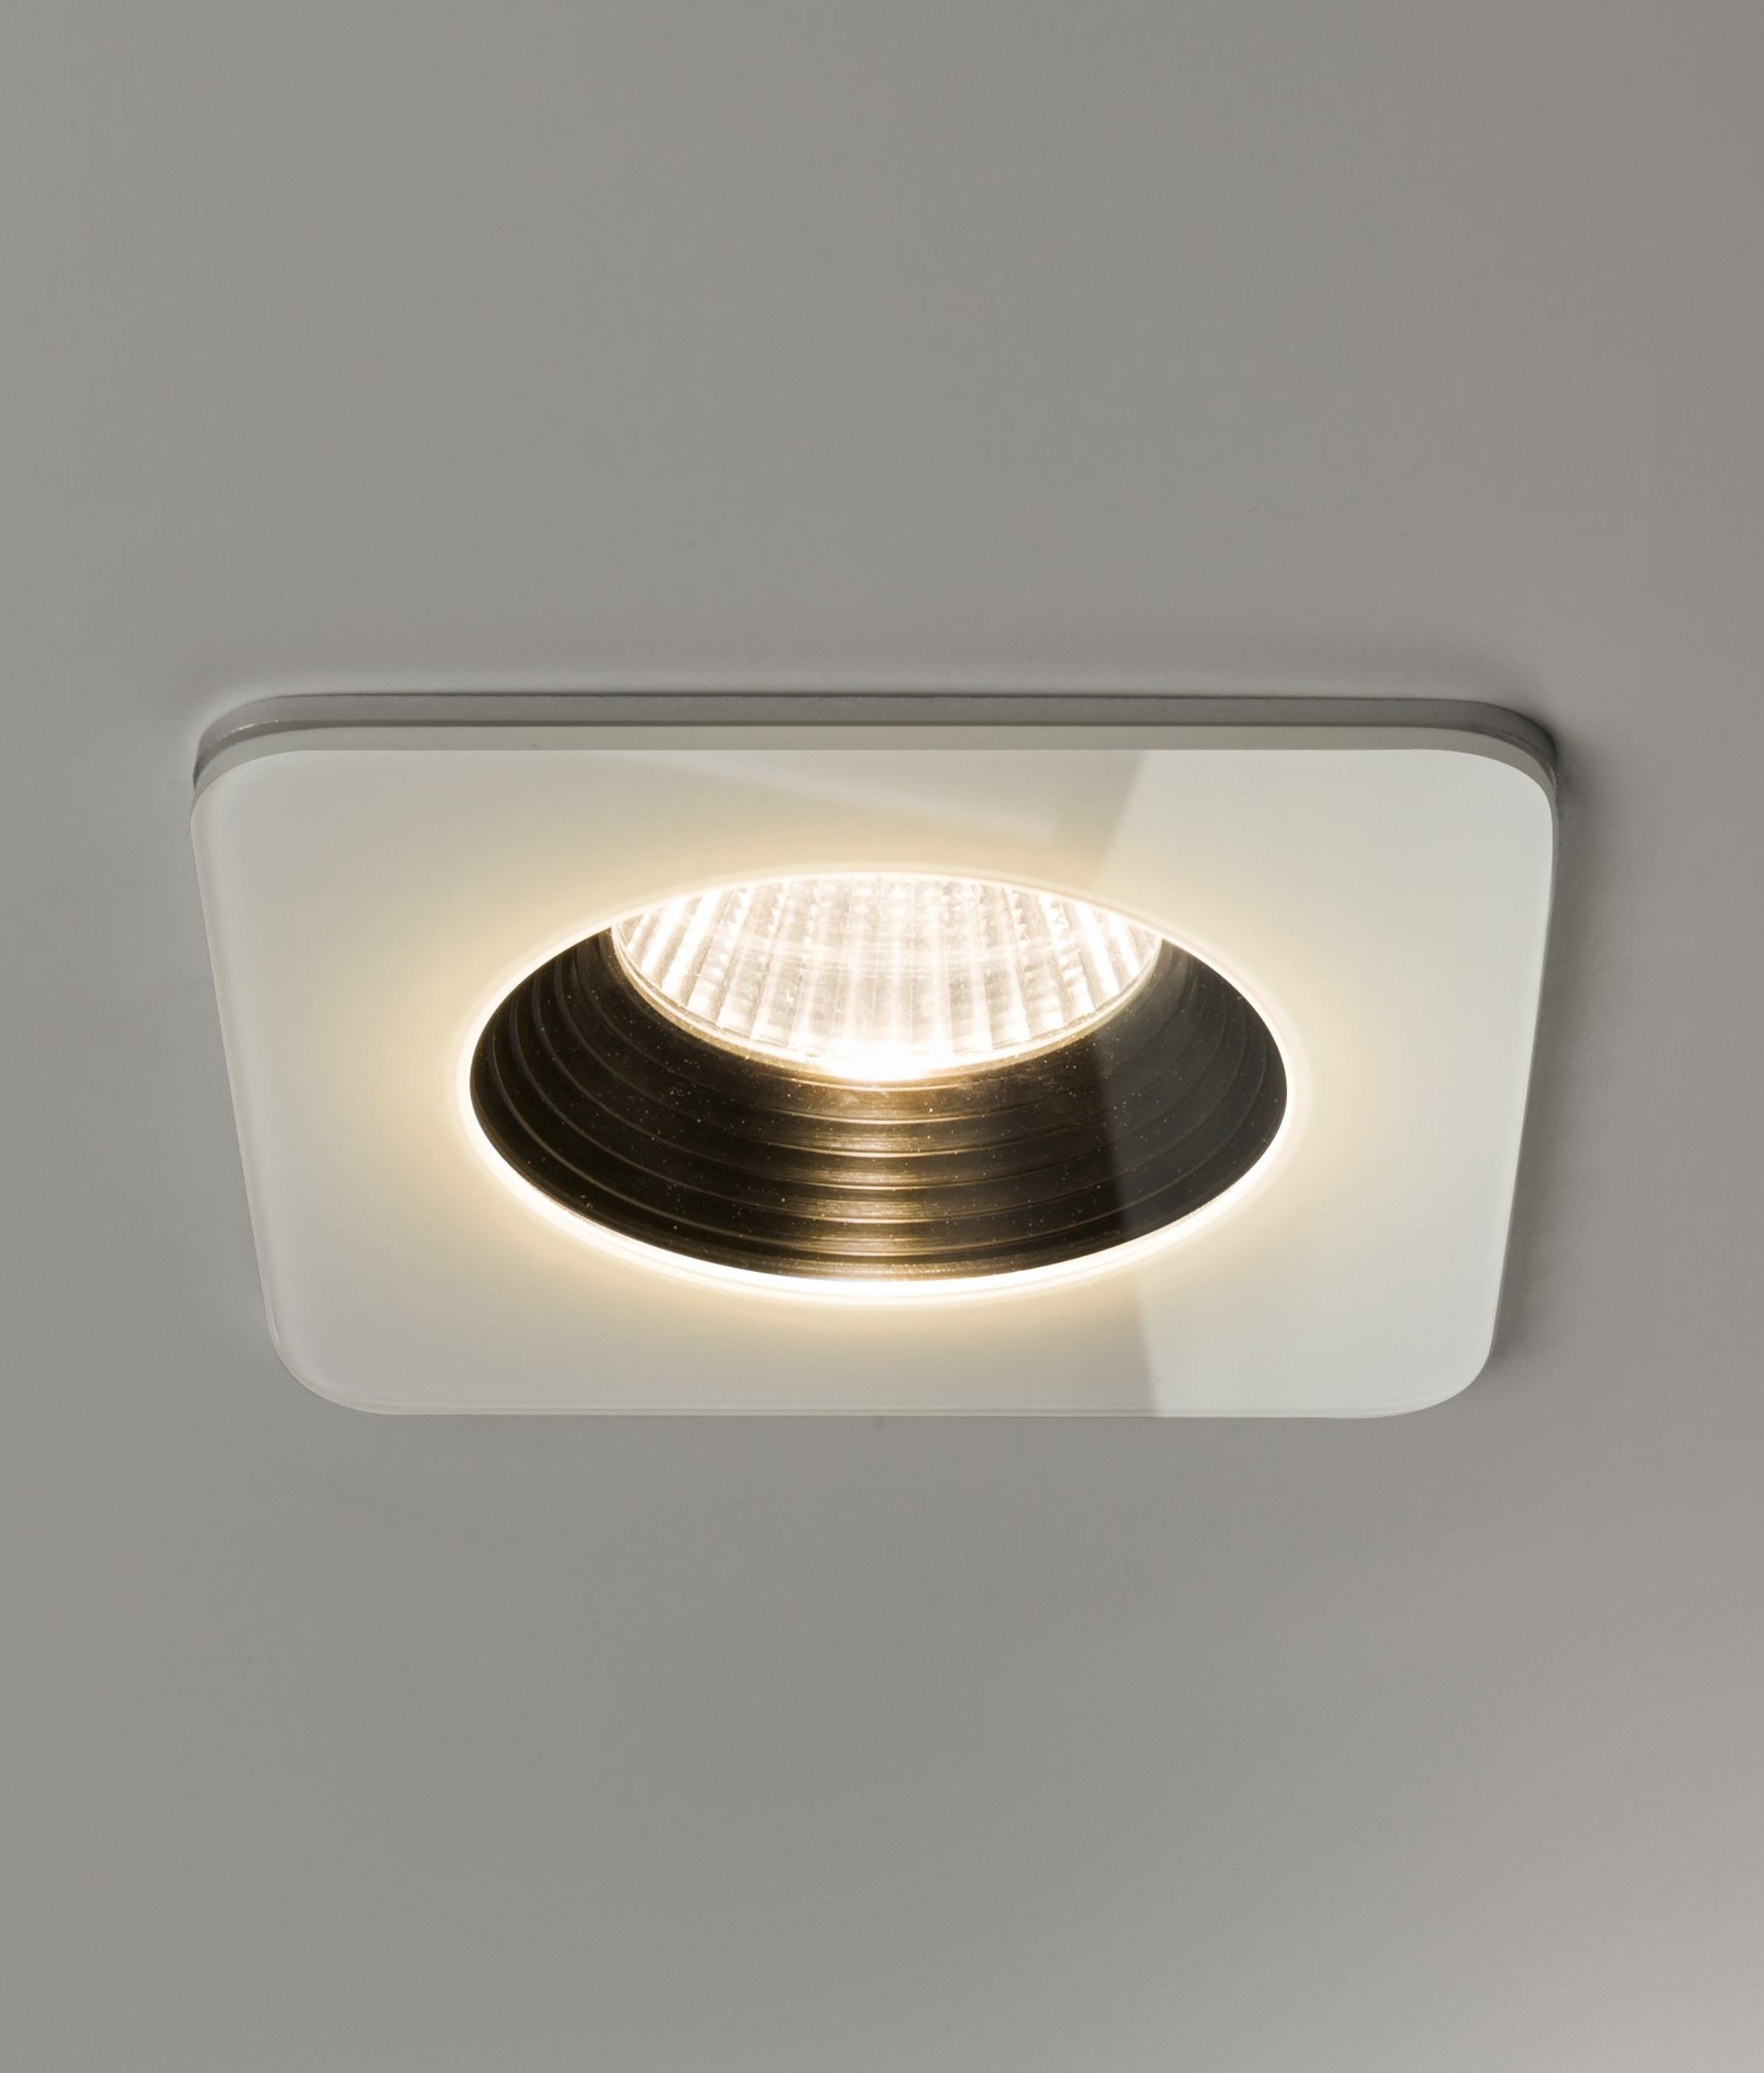 Stunning Round Glass LED Bathroom Fired Rated Downlights In Black